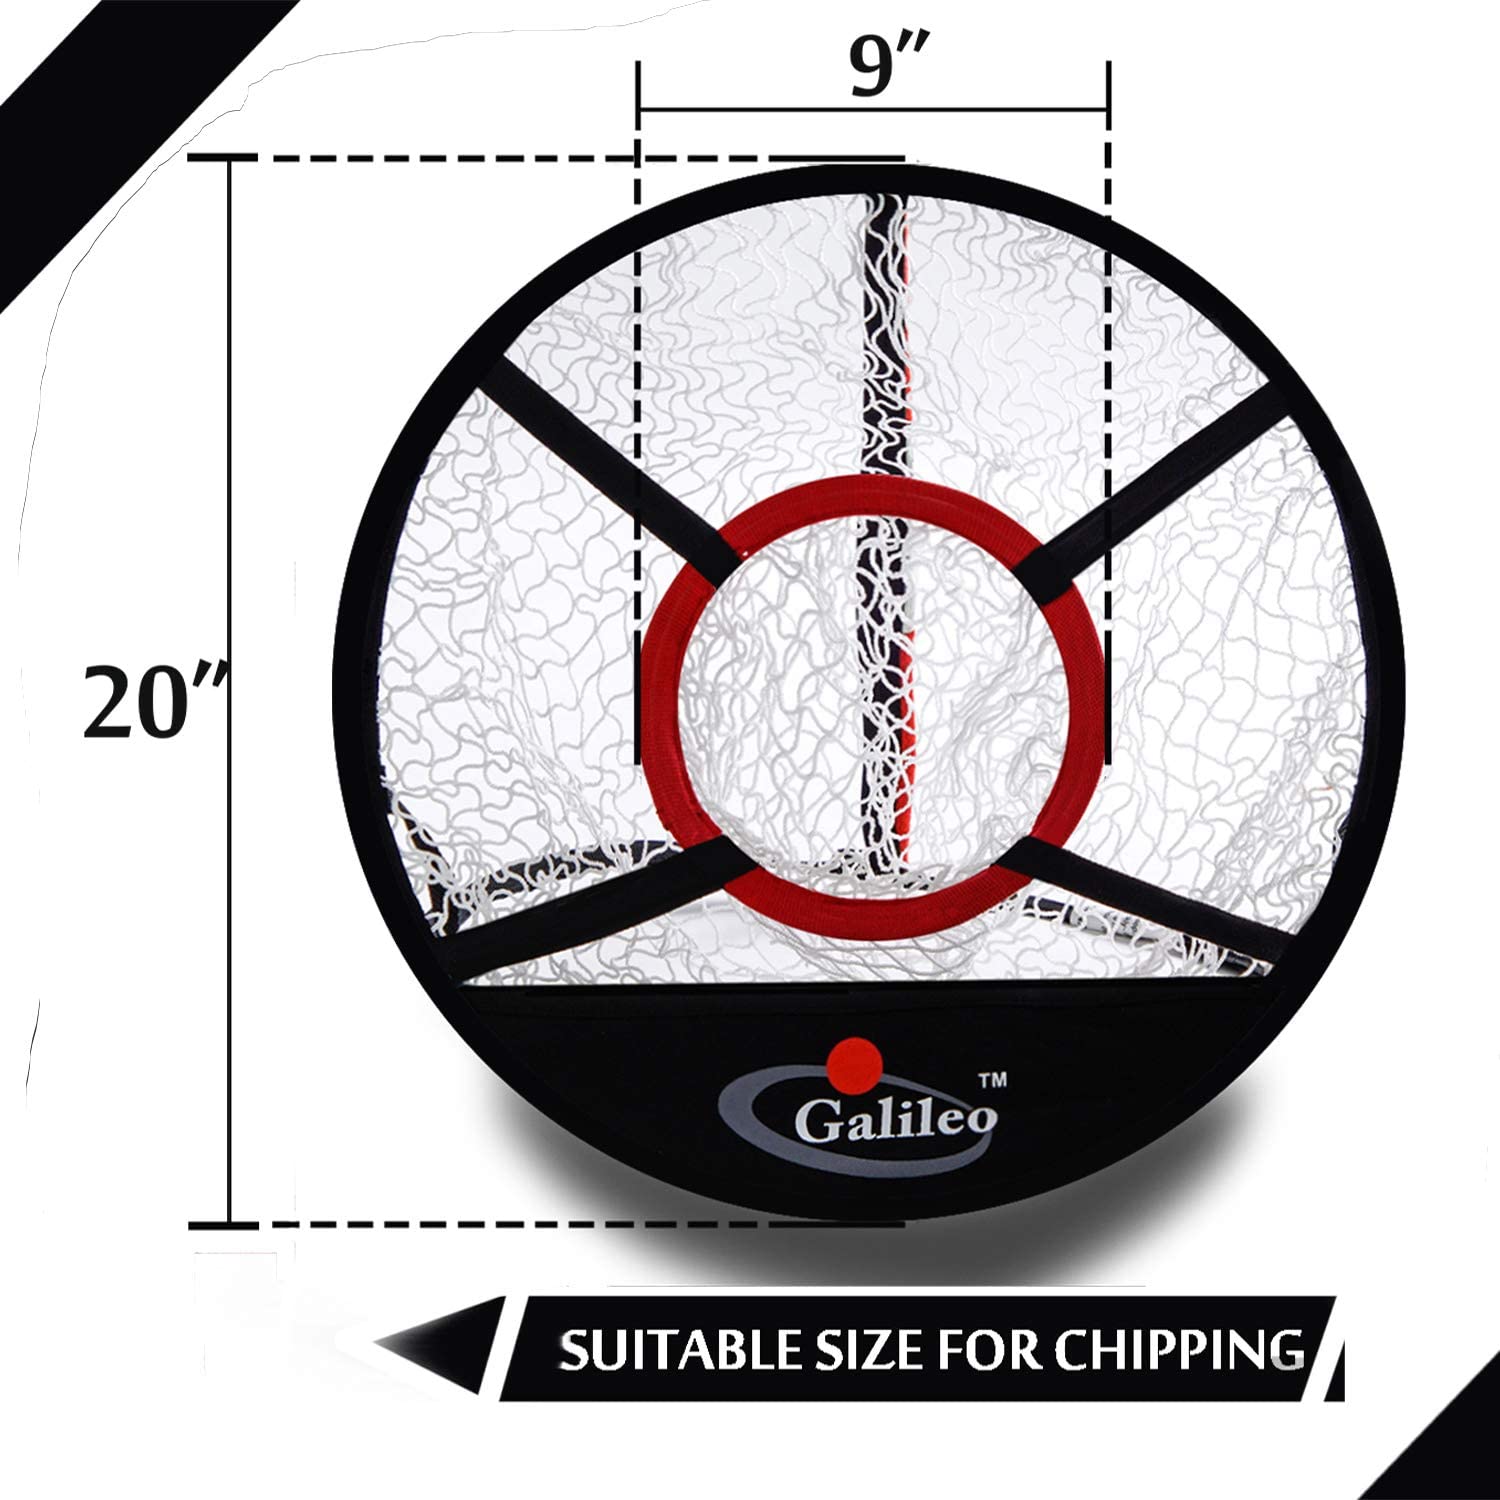 Galileo Sports Golf Chipping Net Golf Chipping Net Chipping Golf Chipping Practice Net Pop Up Golf Chipping Net Juego de golf Chipping Uso en interiores y exteriores